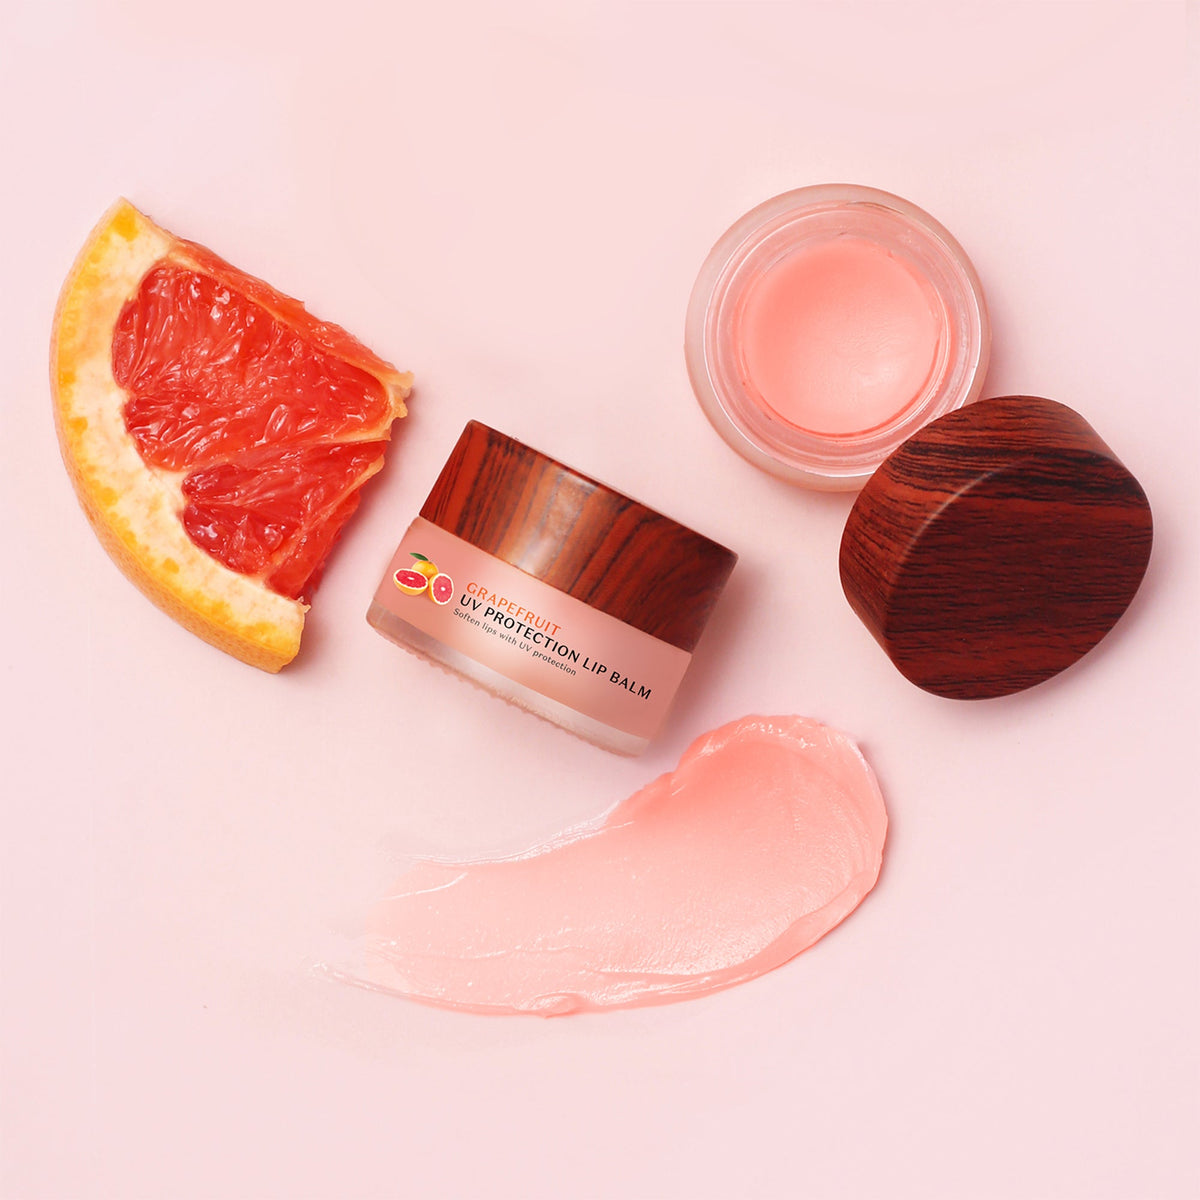 [CRED] Grapefruit UV Protection Lip Balm | From the makers of Parachute Advansed | 5ml